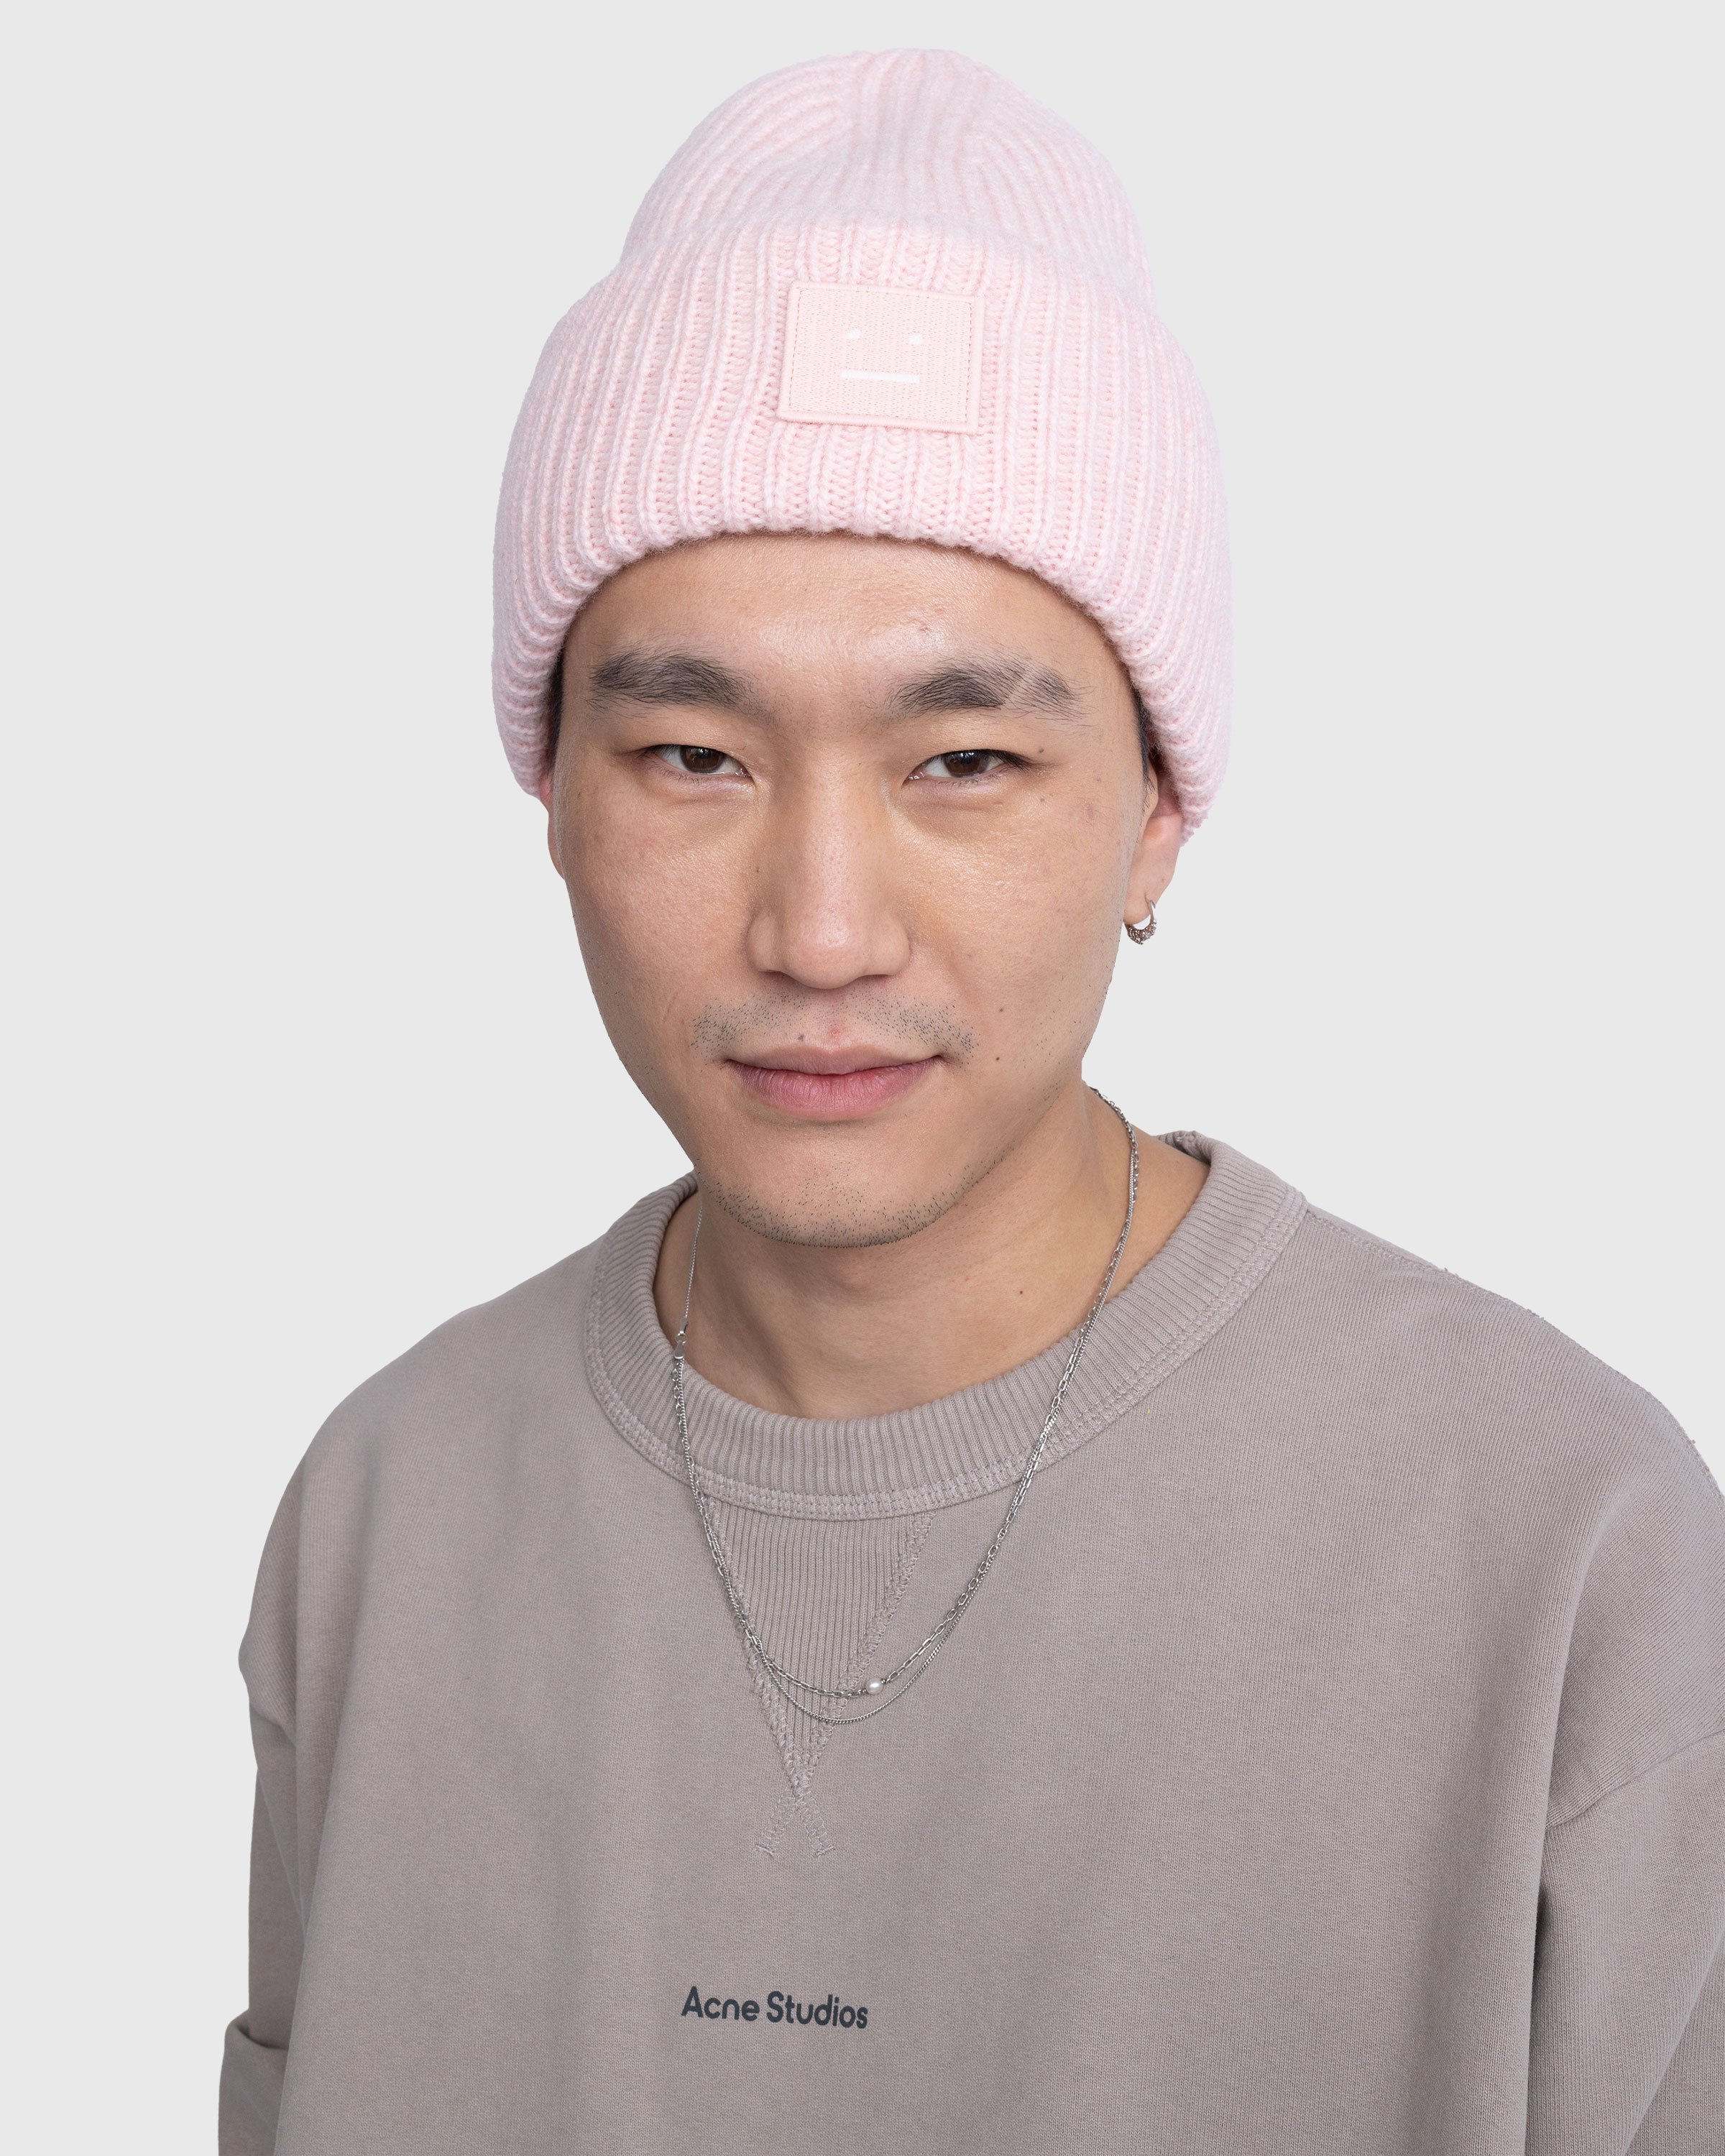 Acne Studios - Large Face Logo Beanie Pink - Accessories - Pink - Image 4